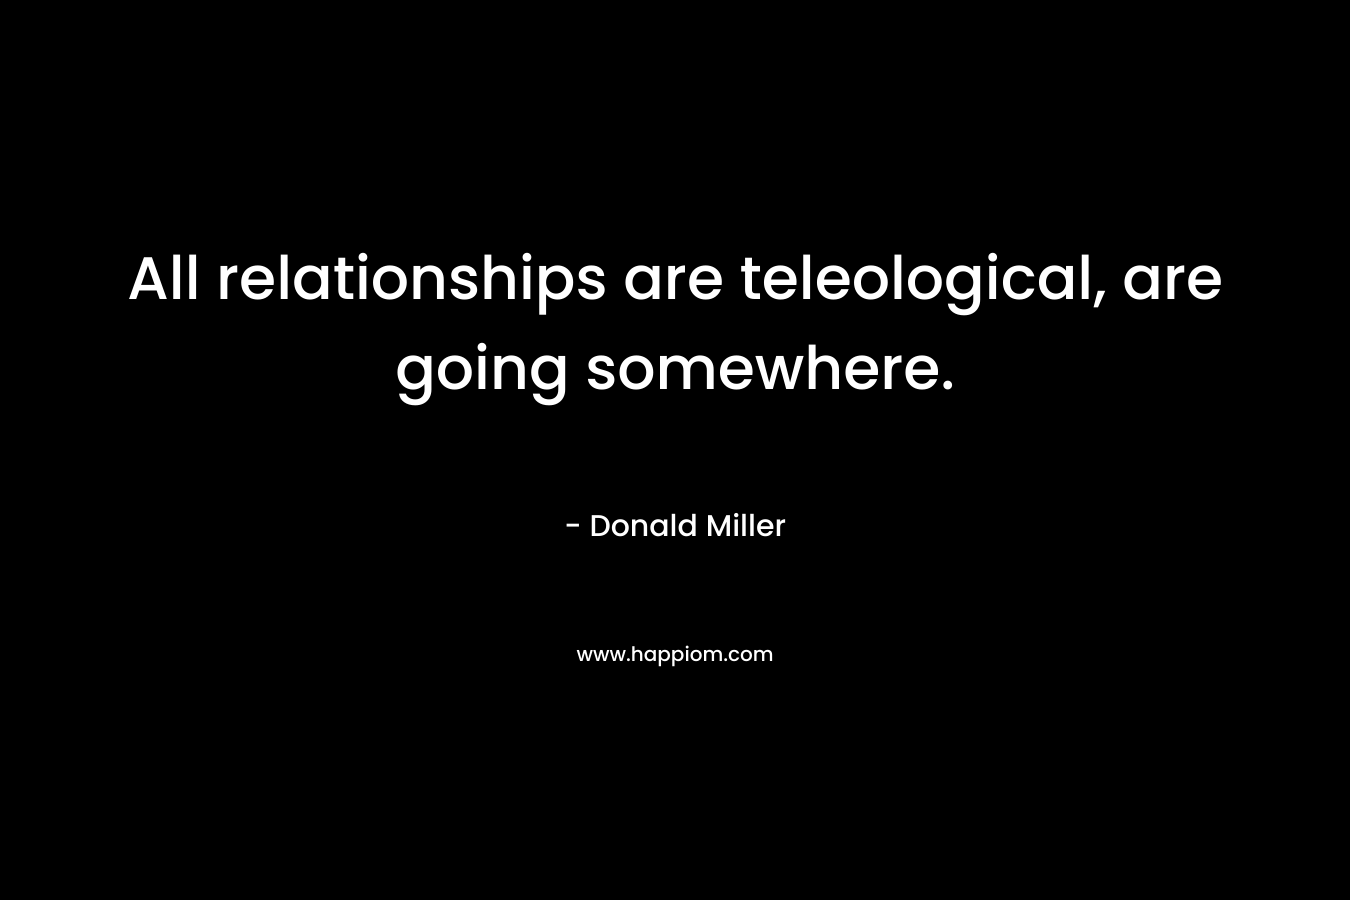 All relationships are teleological, are going somewhere.